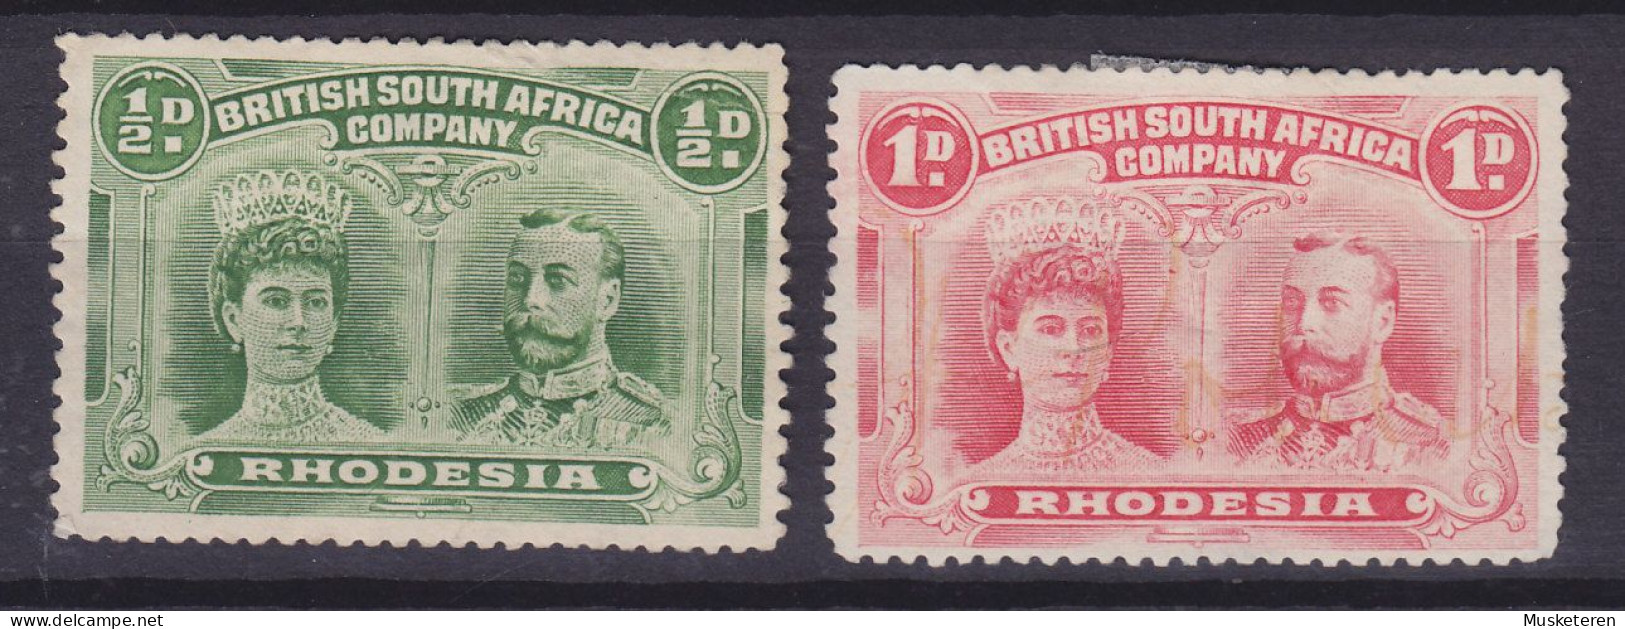 British South Africa Company 1910 Mi. 101c, 102, ½P & 1P King George V. & Queen Mary 'Double Heads' Issue, MNG(*) - Unclassified